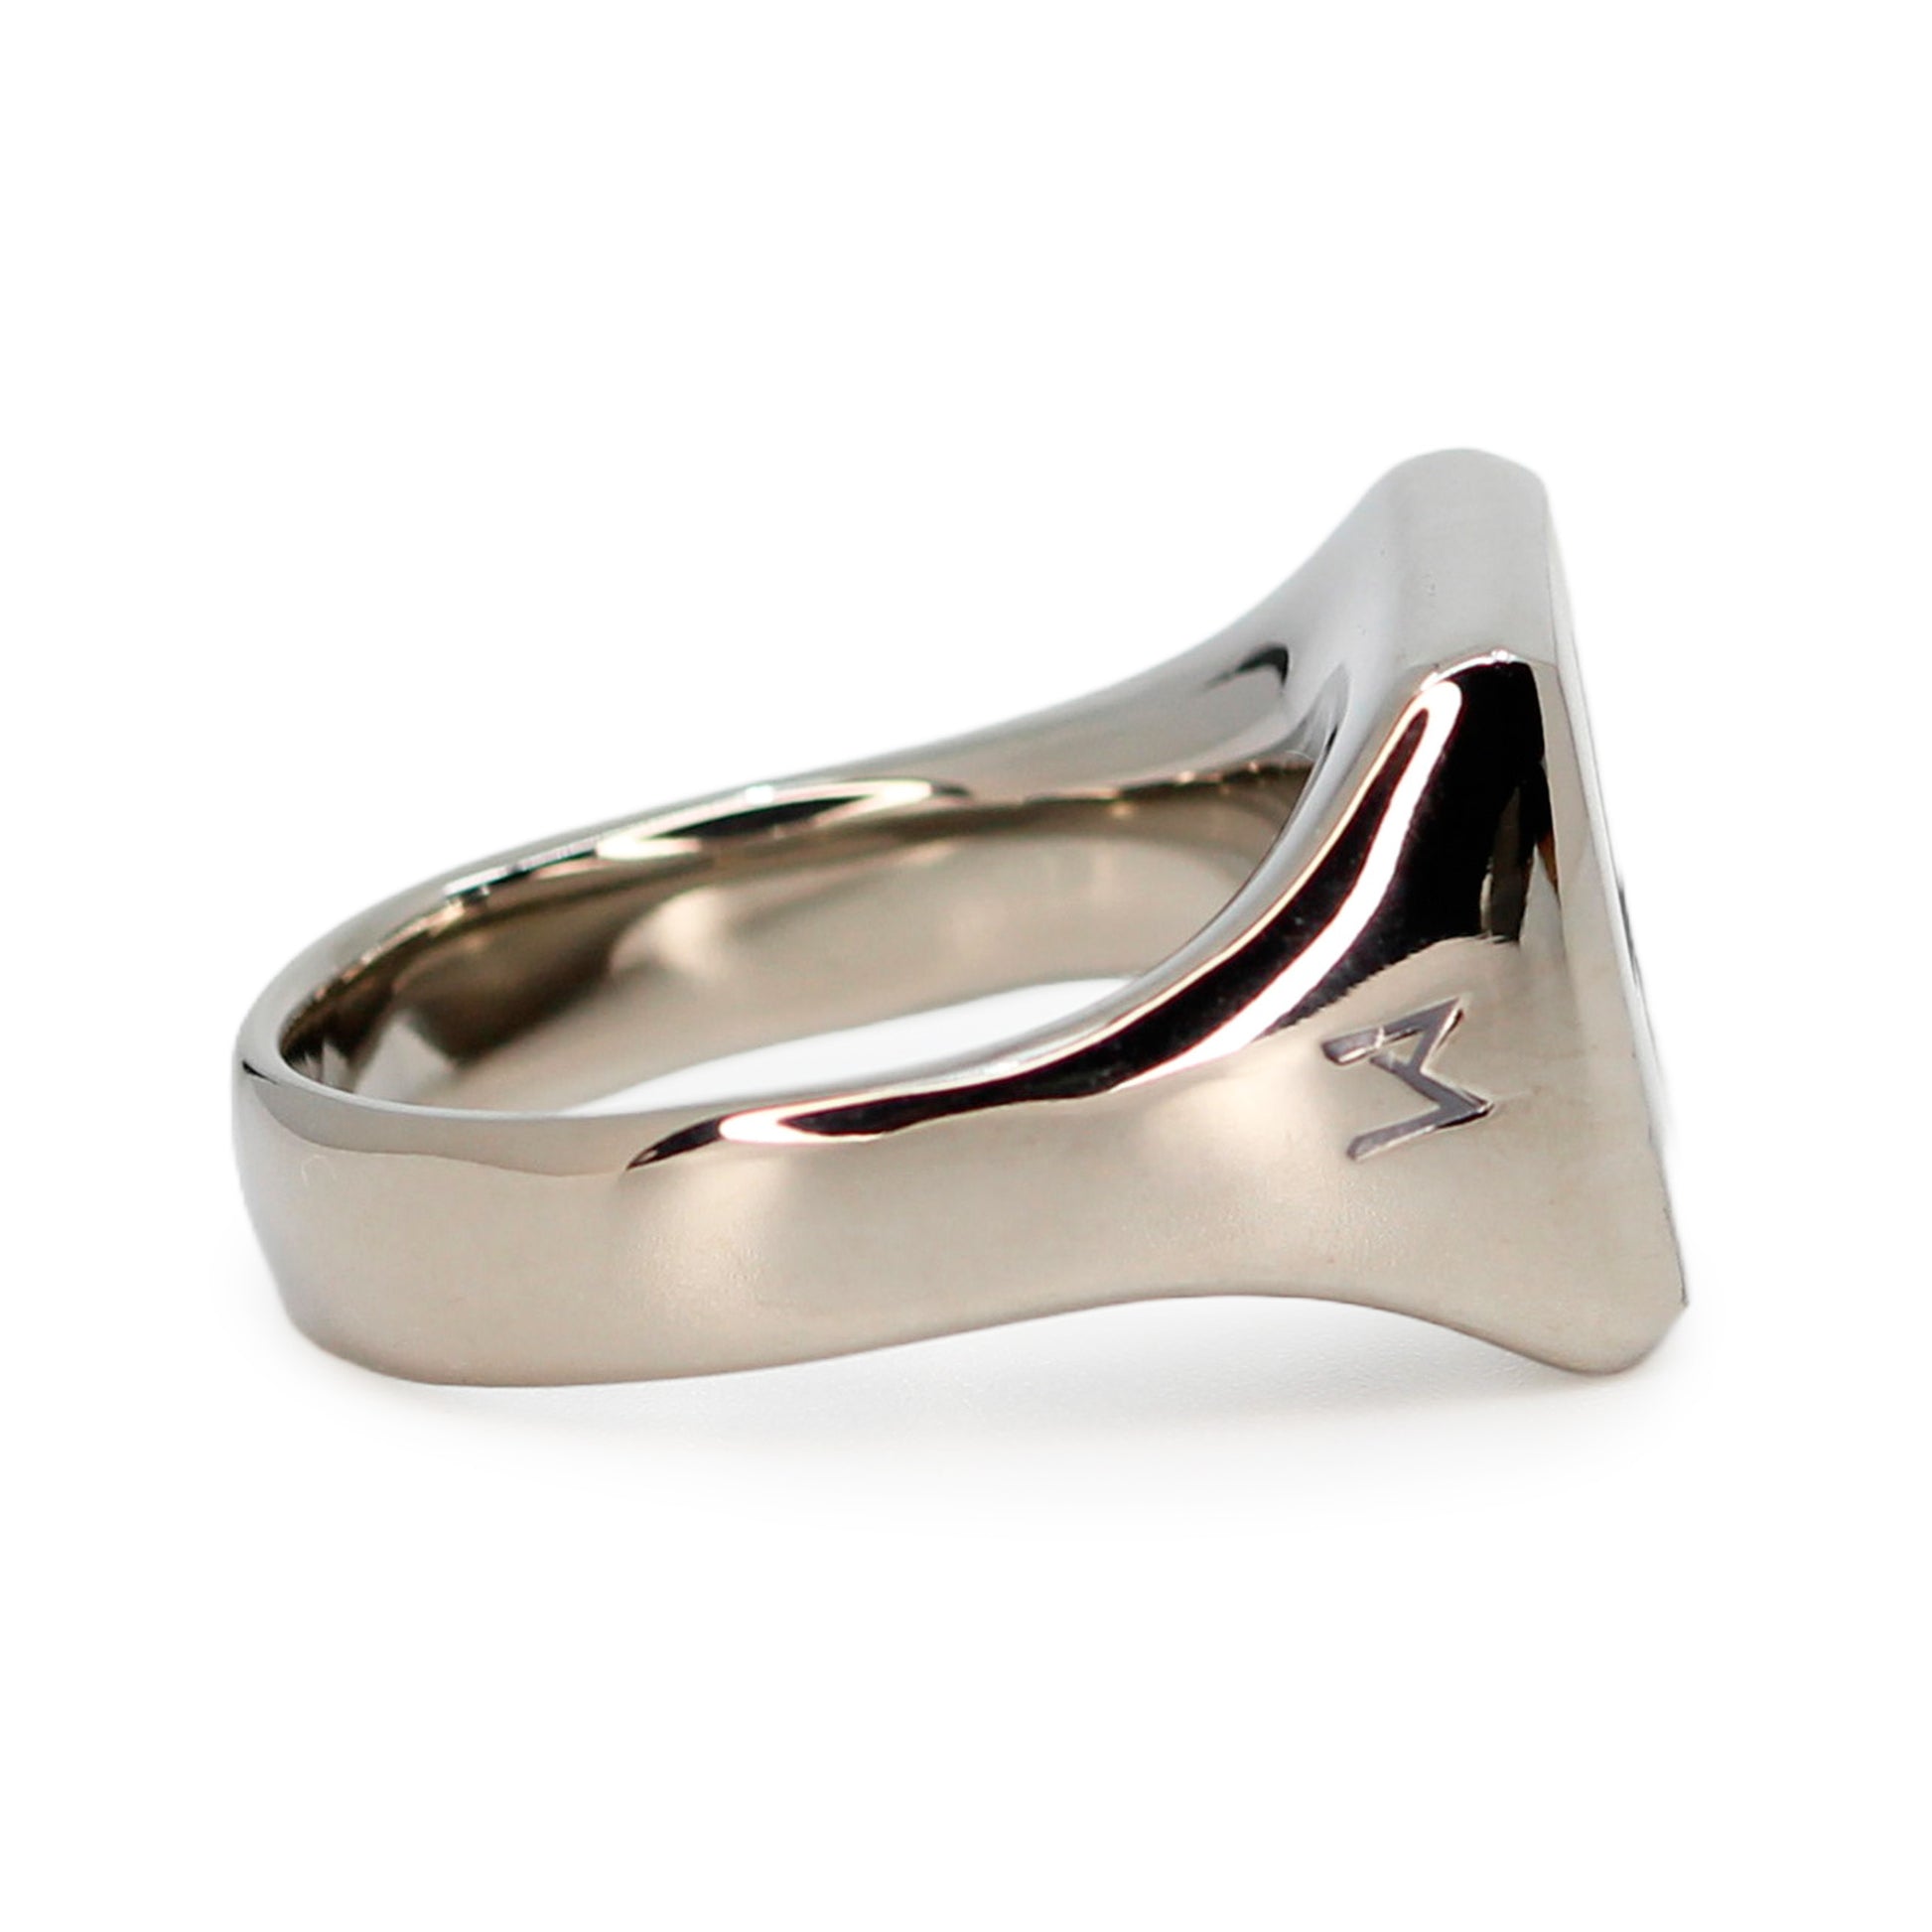 Single silver-colored titanium signet ring, 15x15 mm wide surface. Image shows side view of the ring